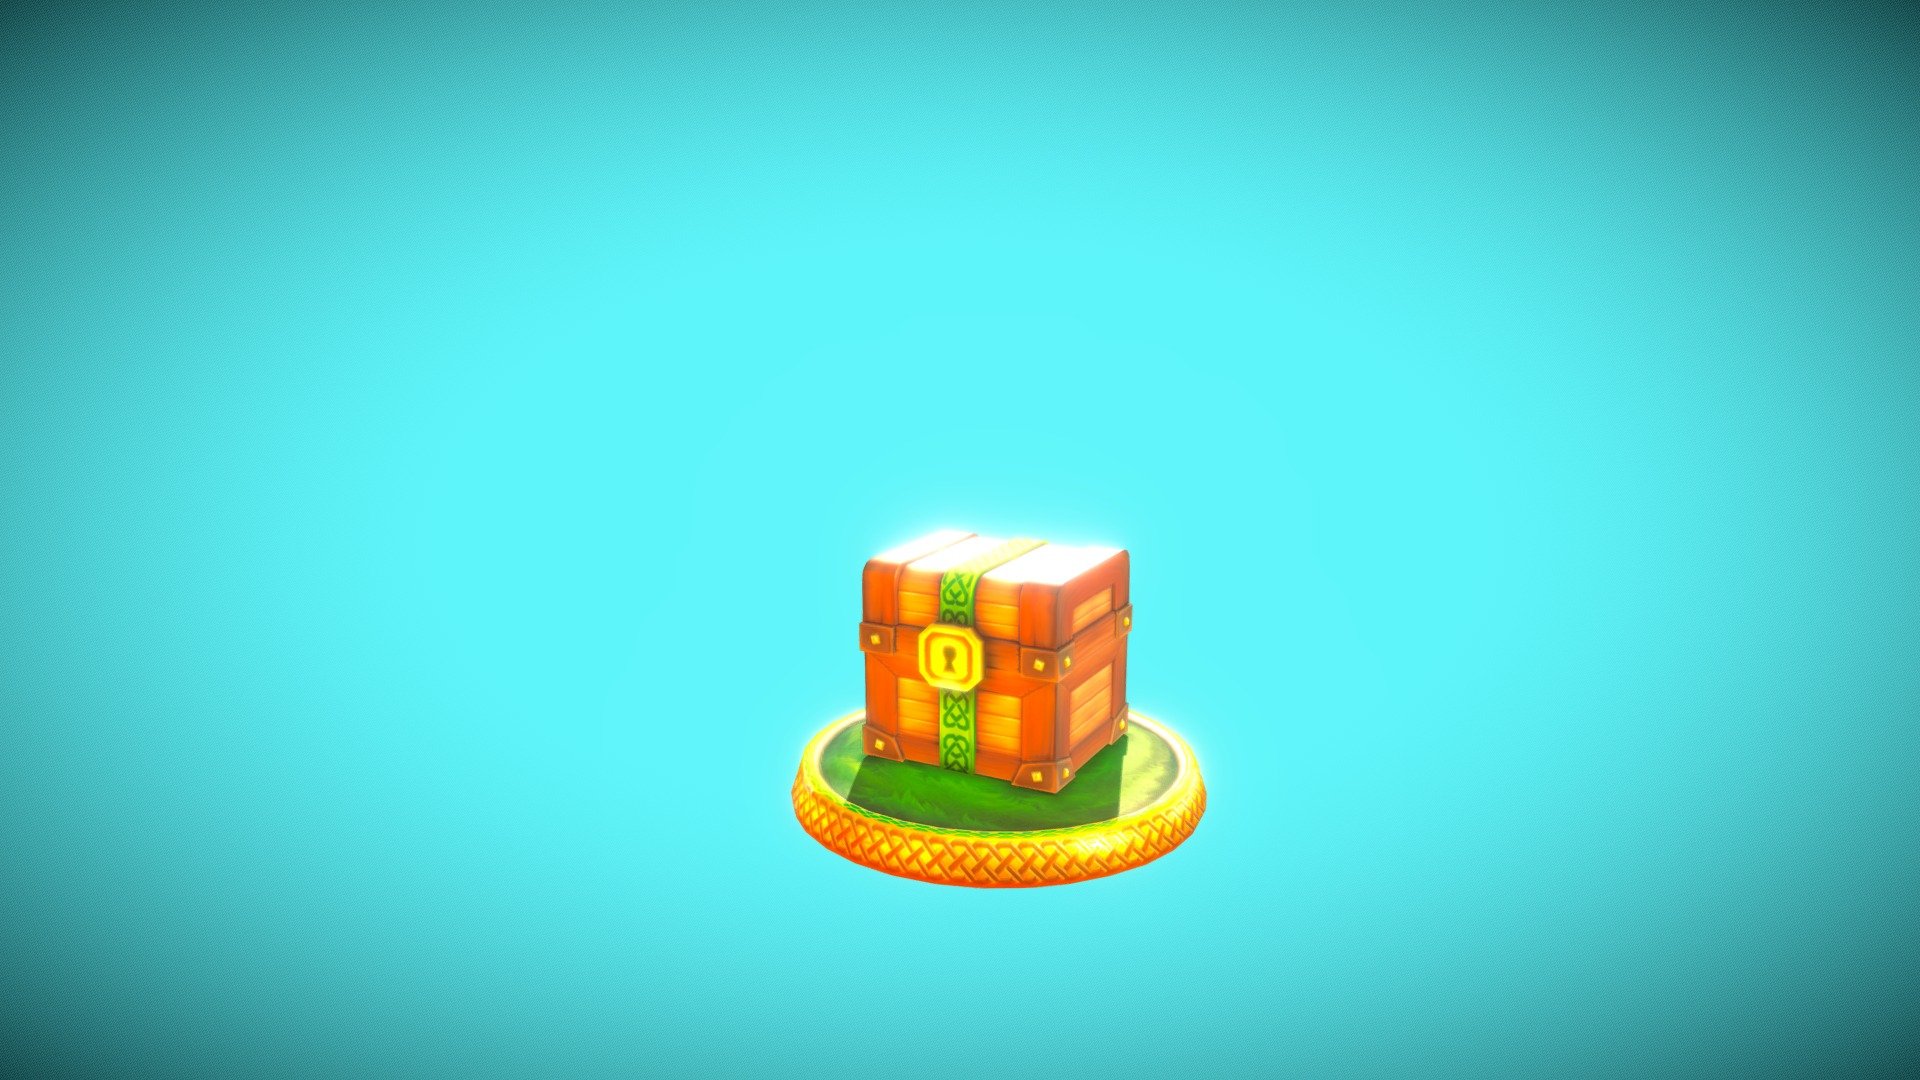 I made this little lootbox  from concept to the final animated 3-D asset for a  app we just released called Slots Of Gold - Big Win. The hand painted style was inspired off a lot of modern games 3d model